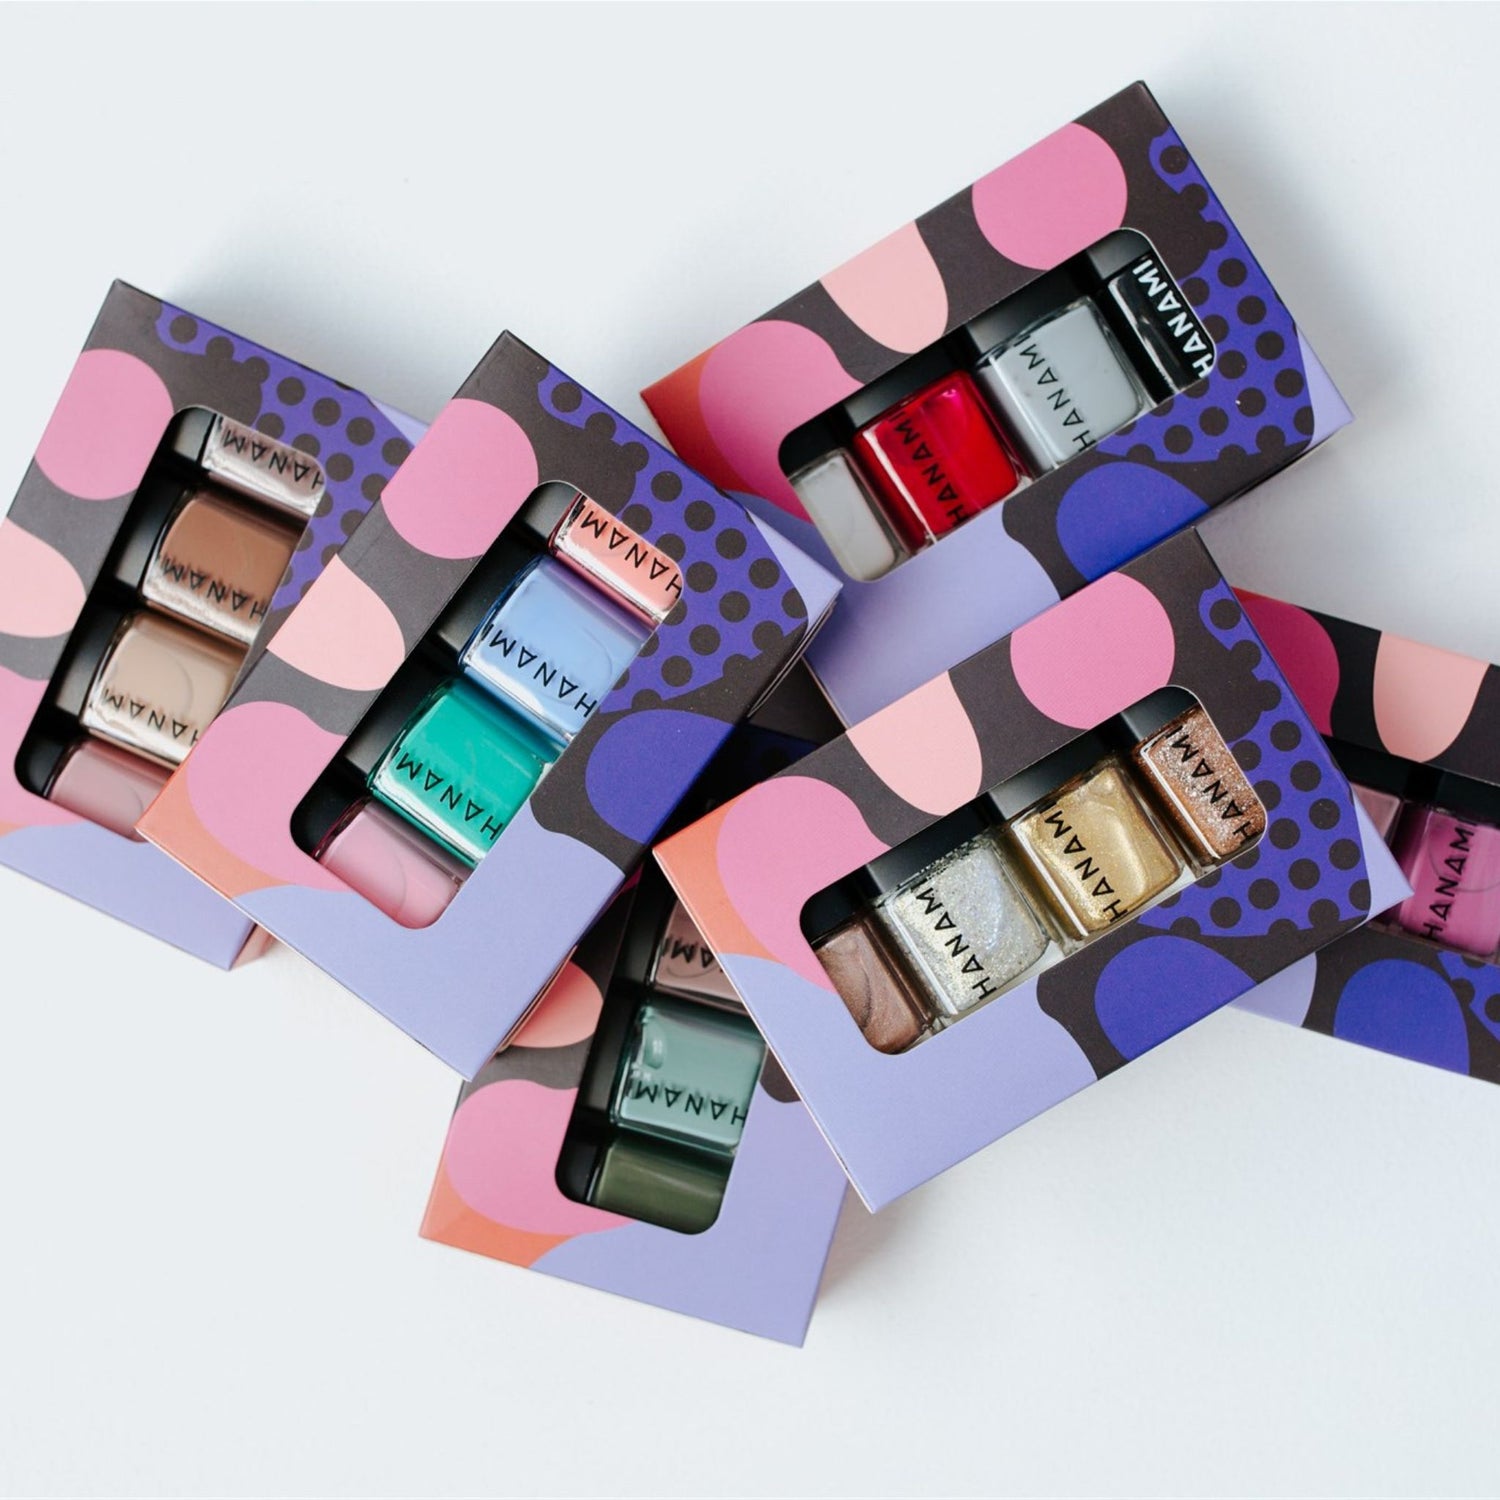 Variety of Hanami cruelty free nail polishes in gift boxes